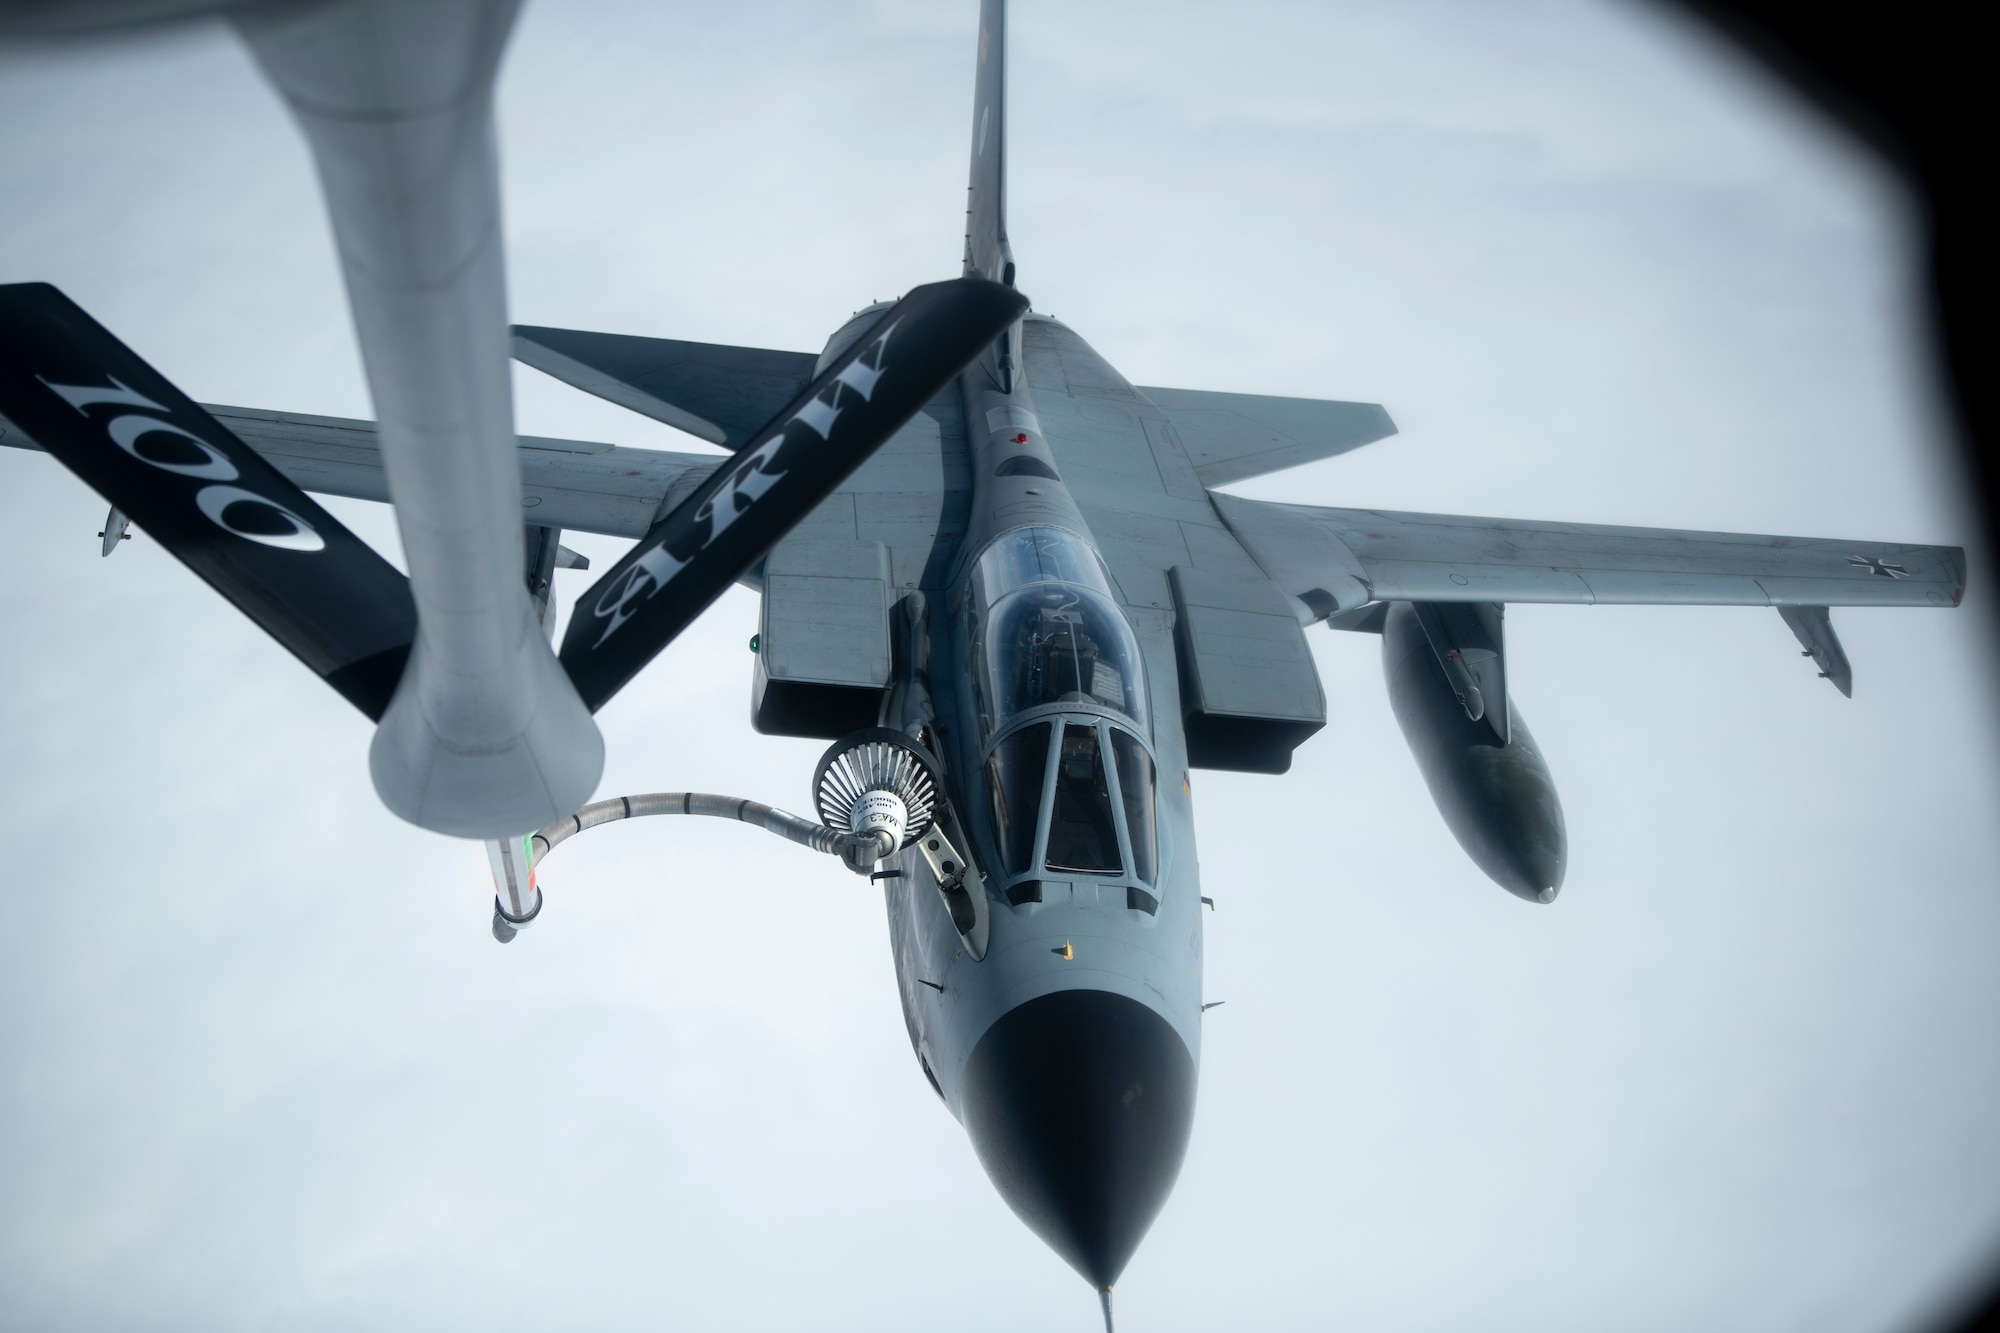 Fighter aircraft being refueled in mid-air.